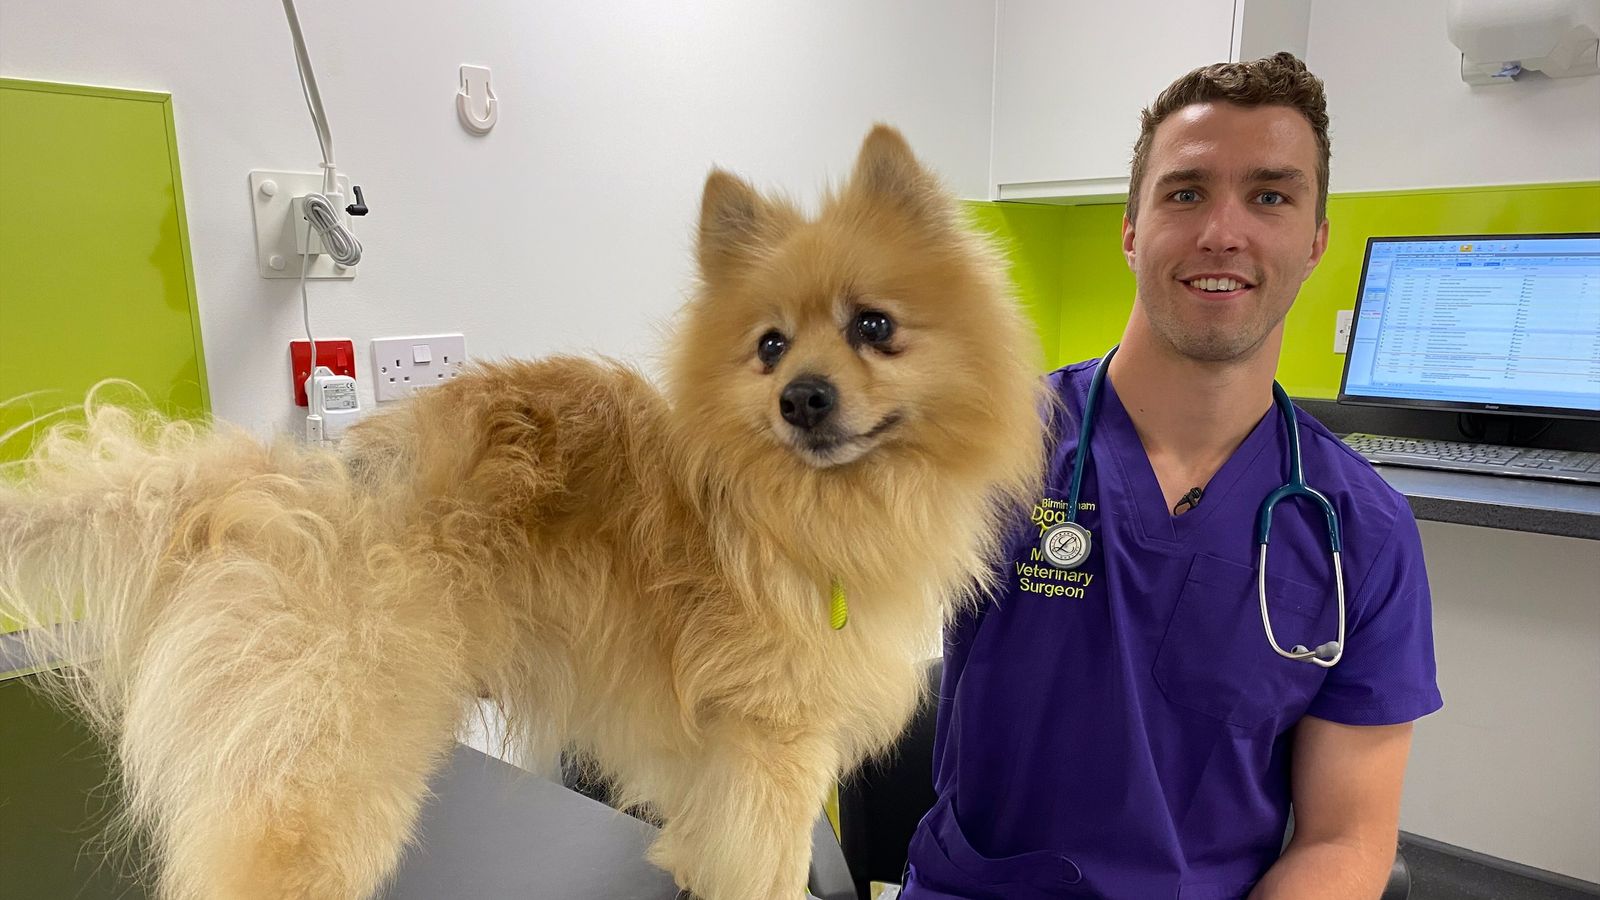 Vet Matt Perks with Bear, a 4 year old Pomeranian, who has had a testicular tumour removed. Bear will soon be ready to be re- homed.